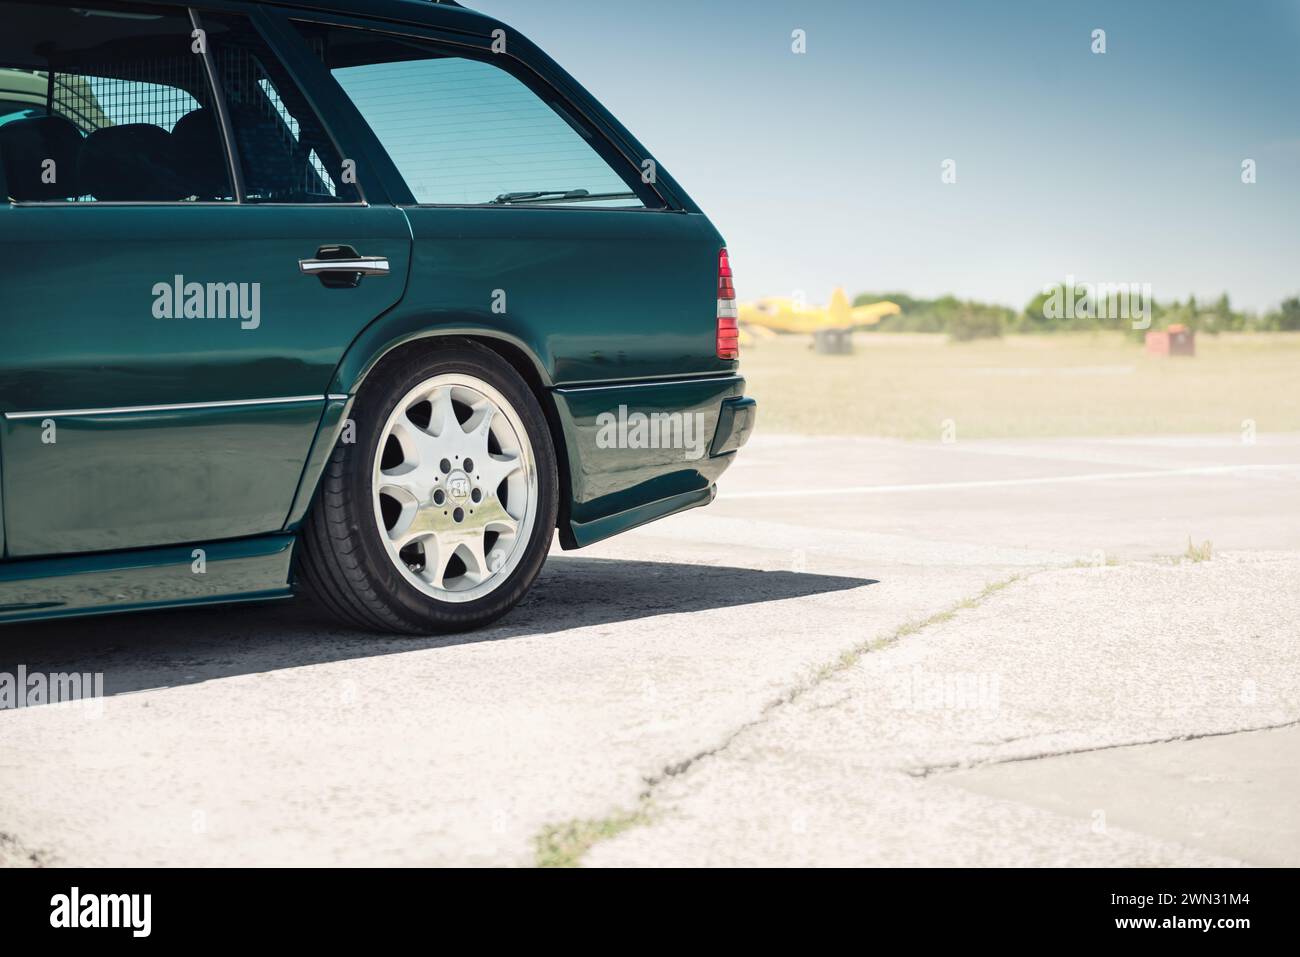 rear quarter of dark green Mercedes Benz wagon (W124 model). 1980s-1990s Mercedes with Brabus rims on a sunny day. Stock Photo